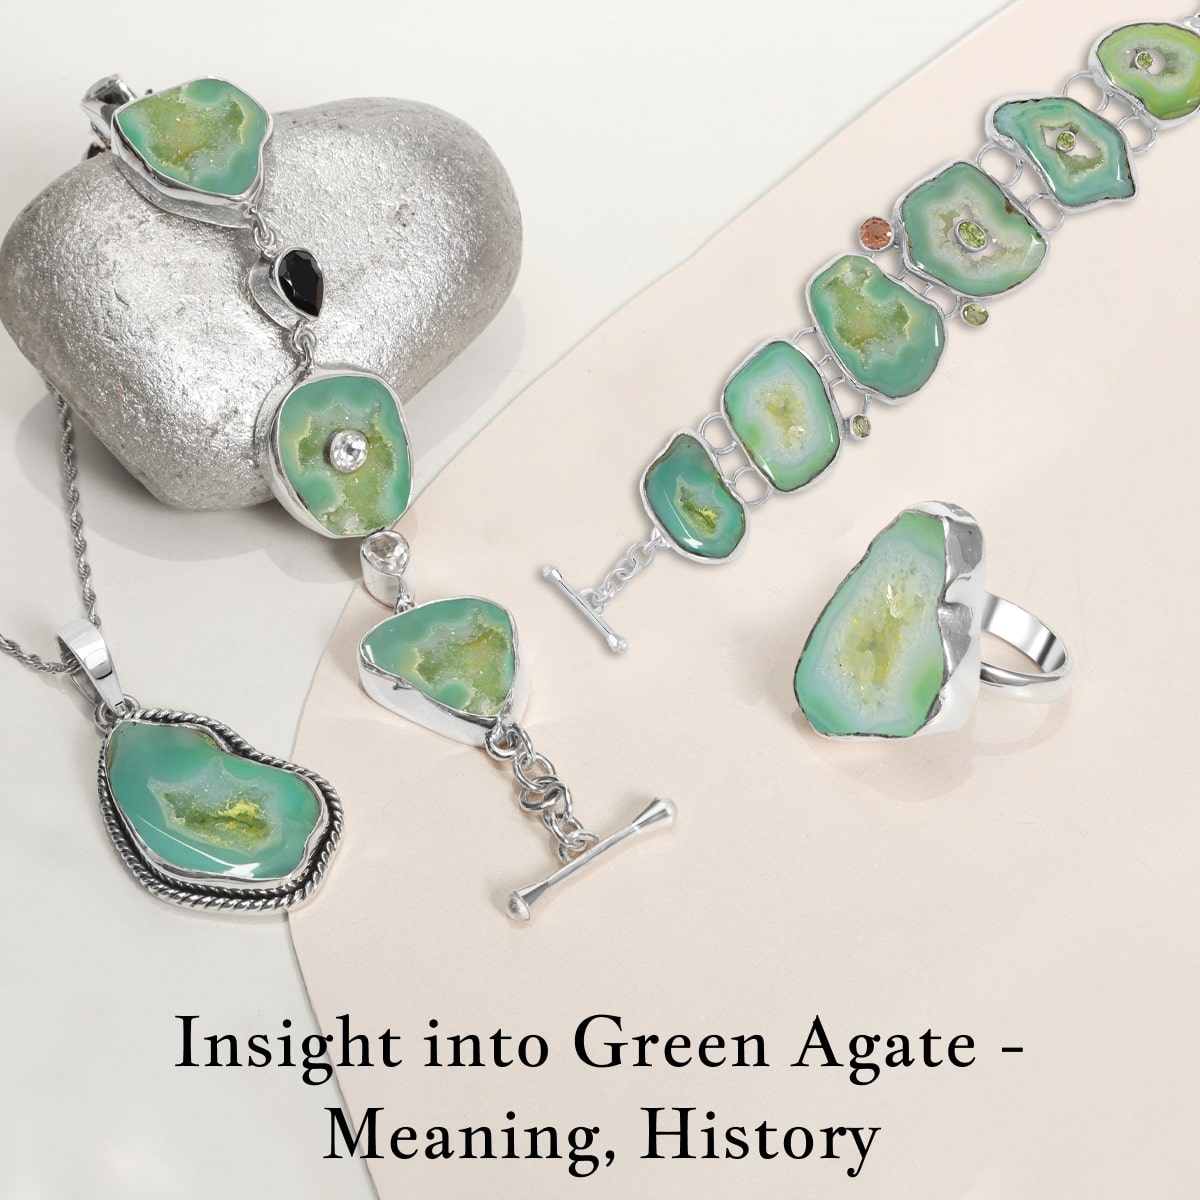 Green Agate Meaning, History, Healing Properties, Uses, Formation and Cleansing